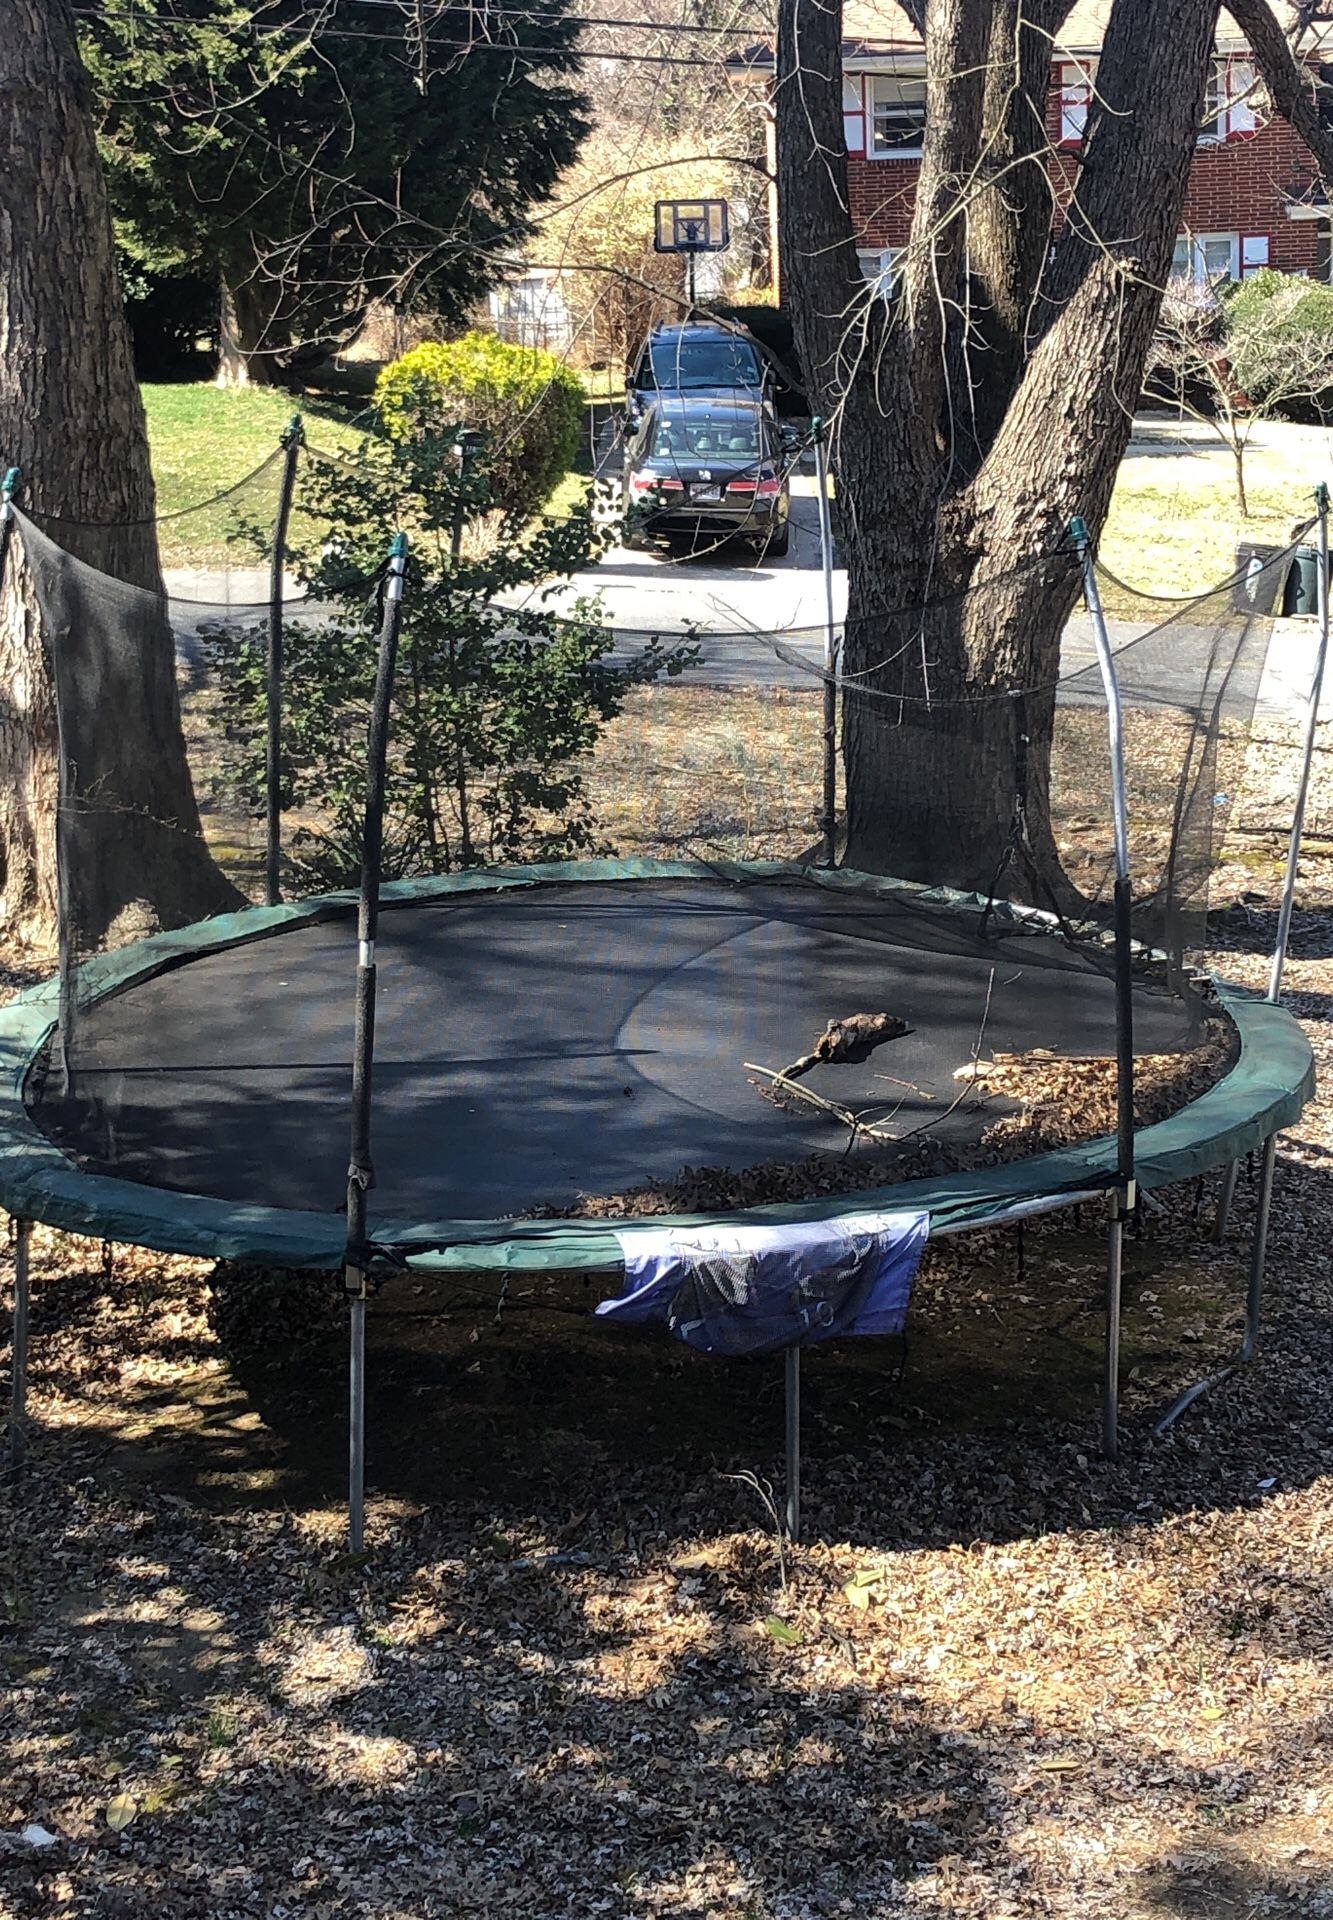 Trampoline with net